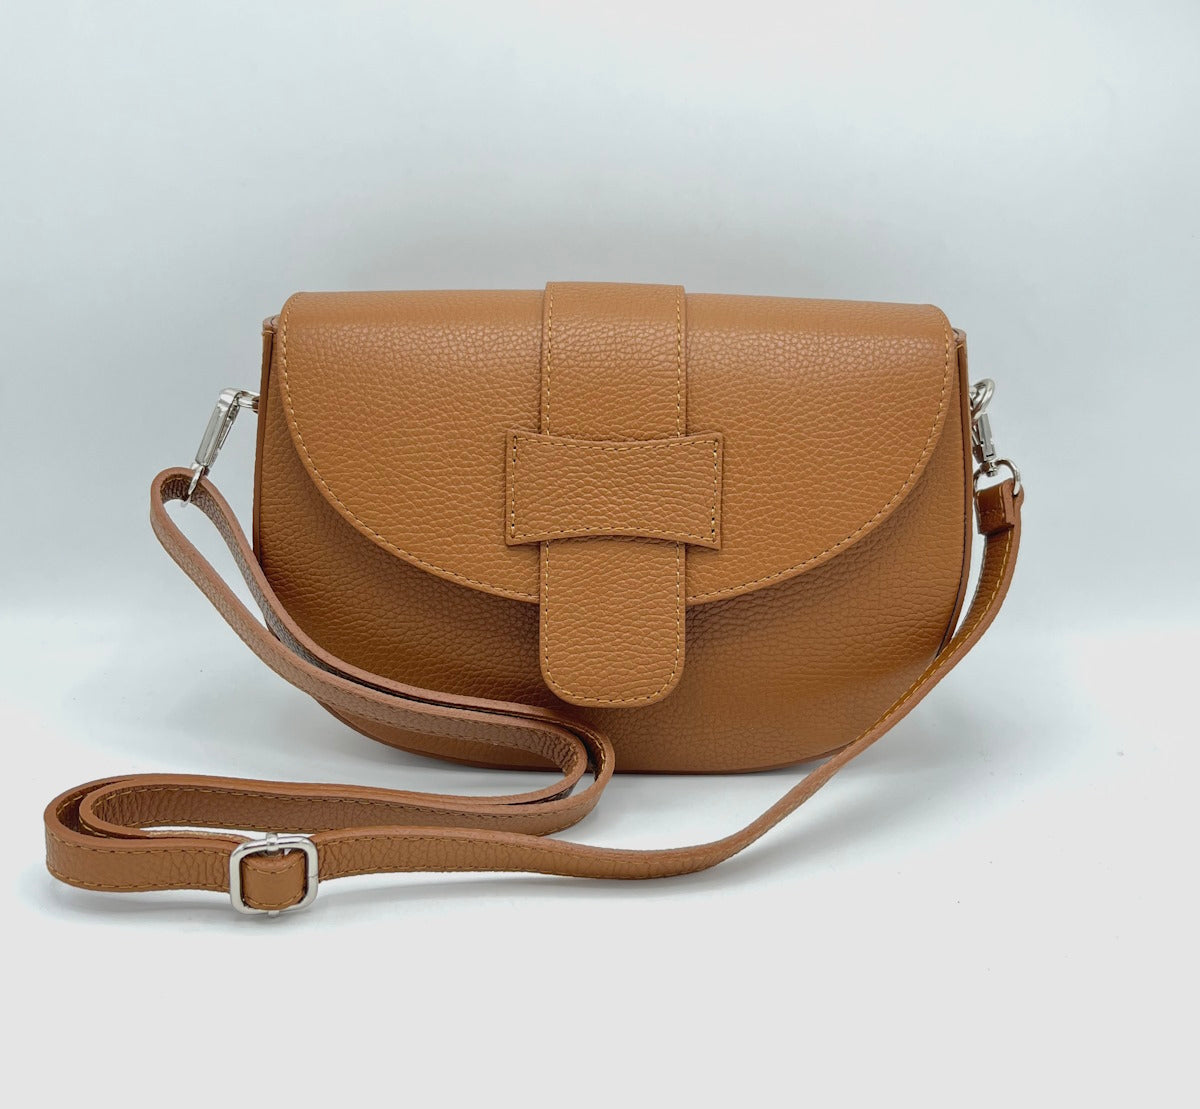 Genuine leather shoulder bag, for women, made in Italy, art. 112430